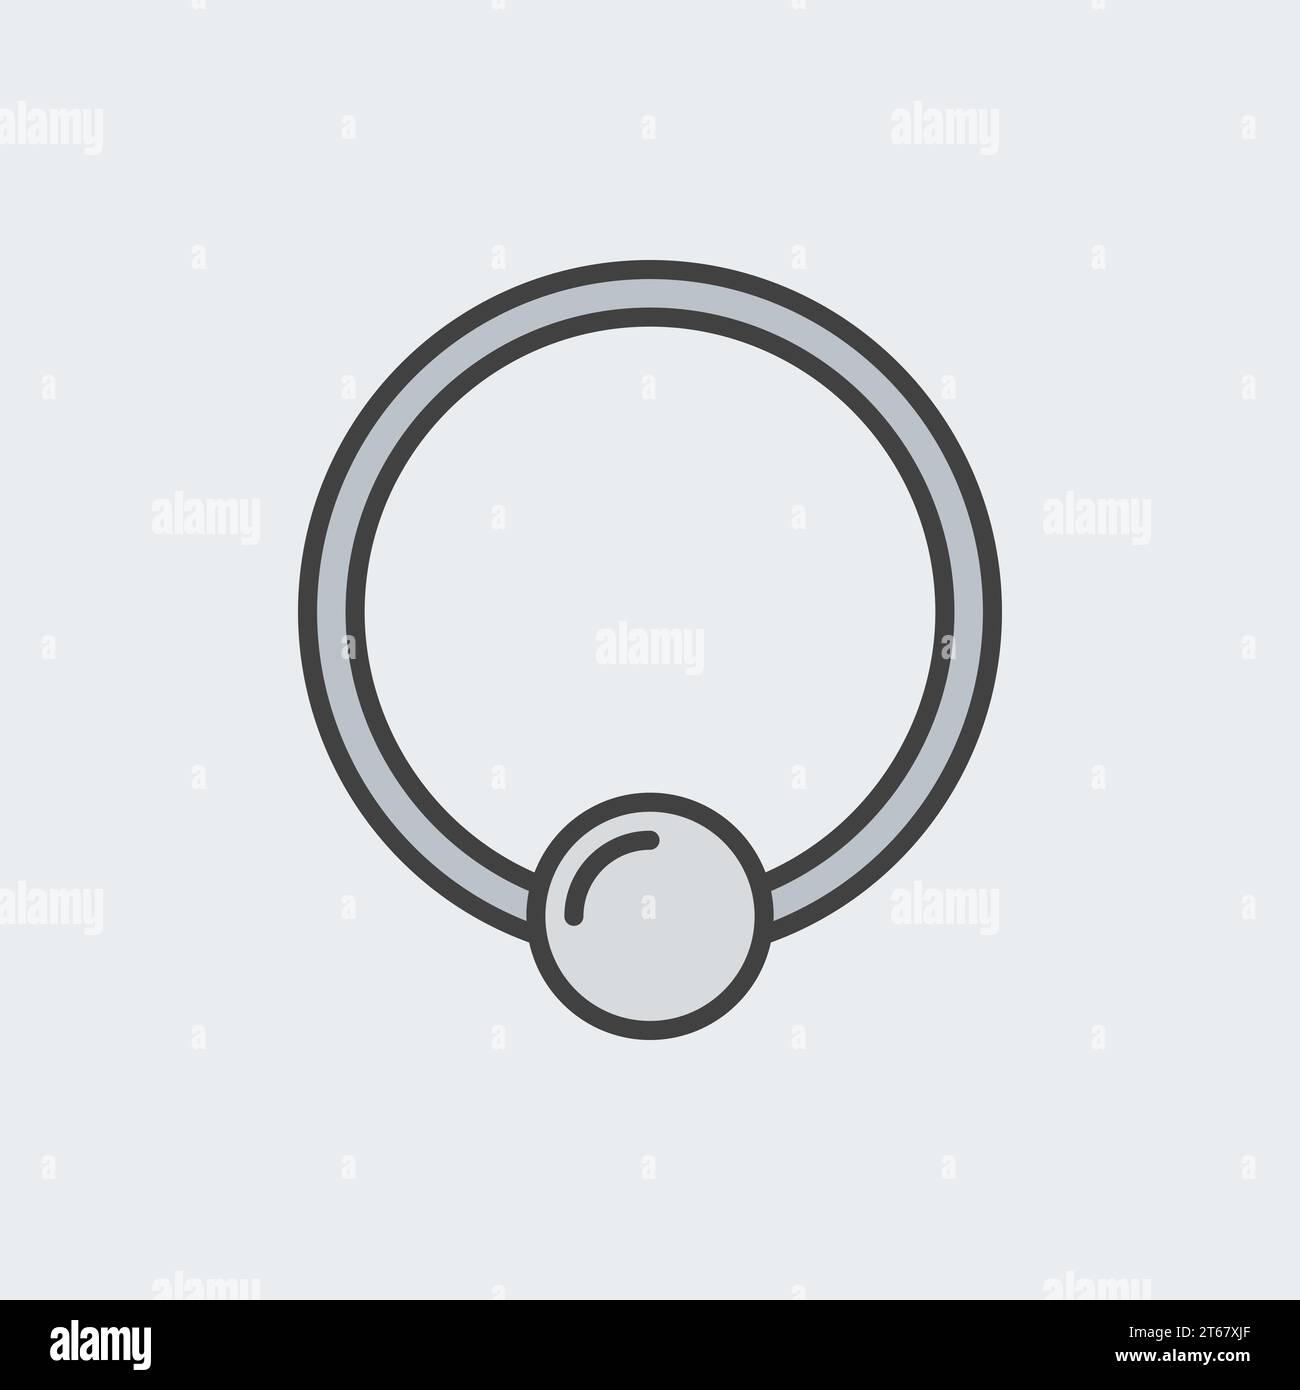 Ball closure ring flat icon. Body piercing jewelry concept sign or logo Stock Vector